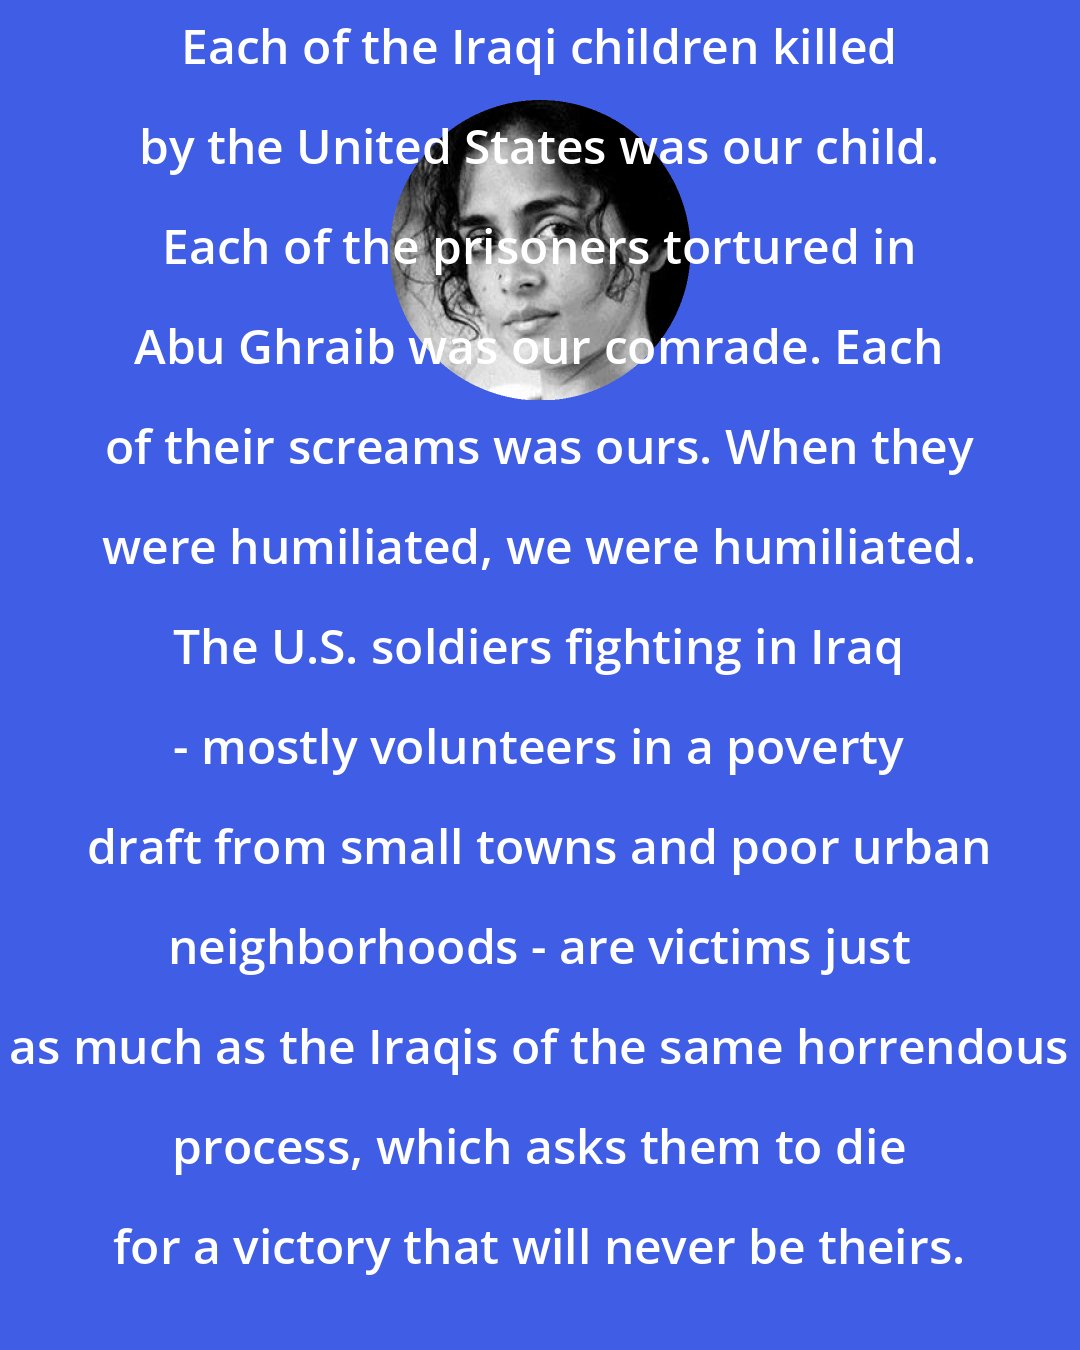 Arundhati Roy: Each of the Iraqi children killed by the United States was our child. Each of the prisoners tortured in Abu Ghraib was our comrade. Each of their screams was ours. When they were humiliated, we were humiliated. The U.S. soldiers fighting in Iraq - mostly volunteers in a poverty draft from small towns and poor urban neighborhoods - are victims just as much as the Iraqis of the same horrendous process, which asks them to die for a victory that will never be theirs.